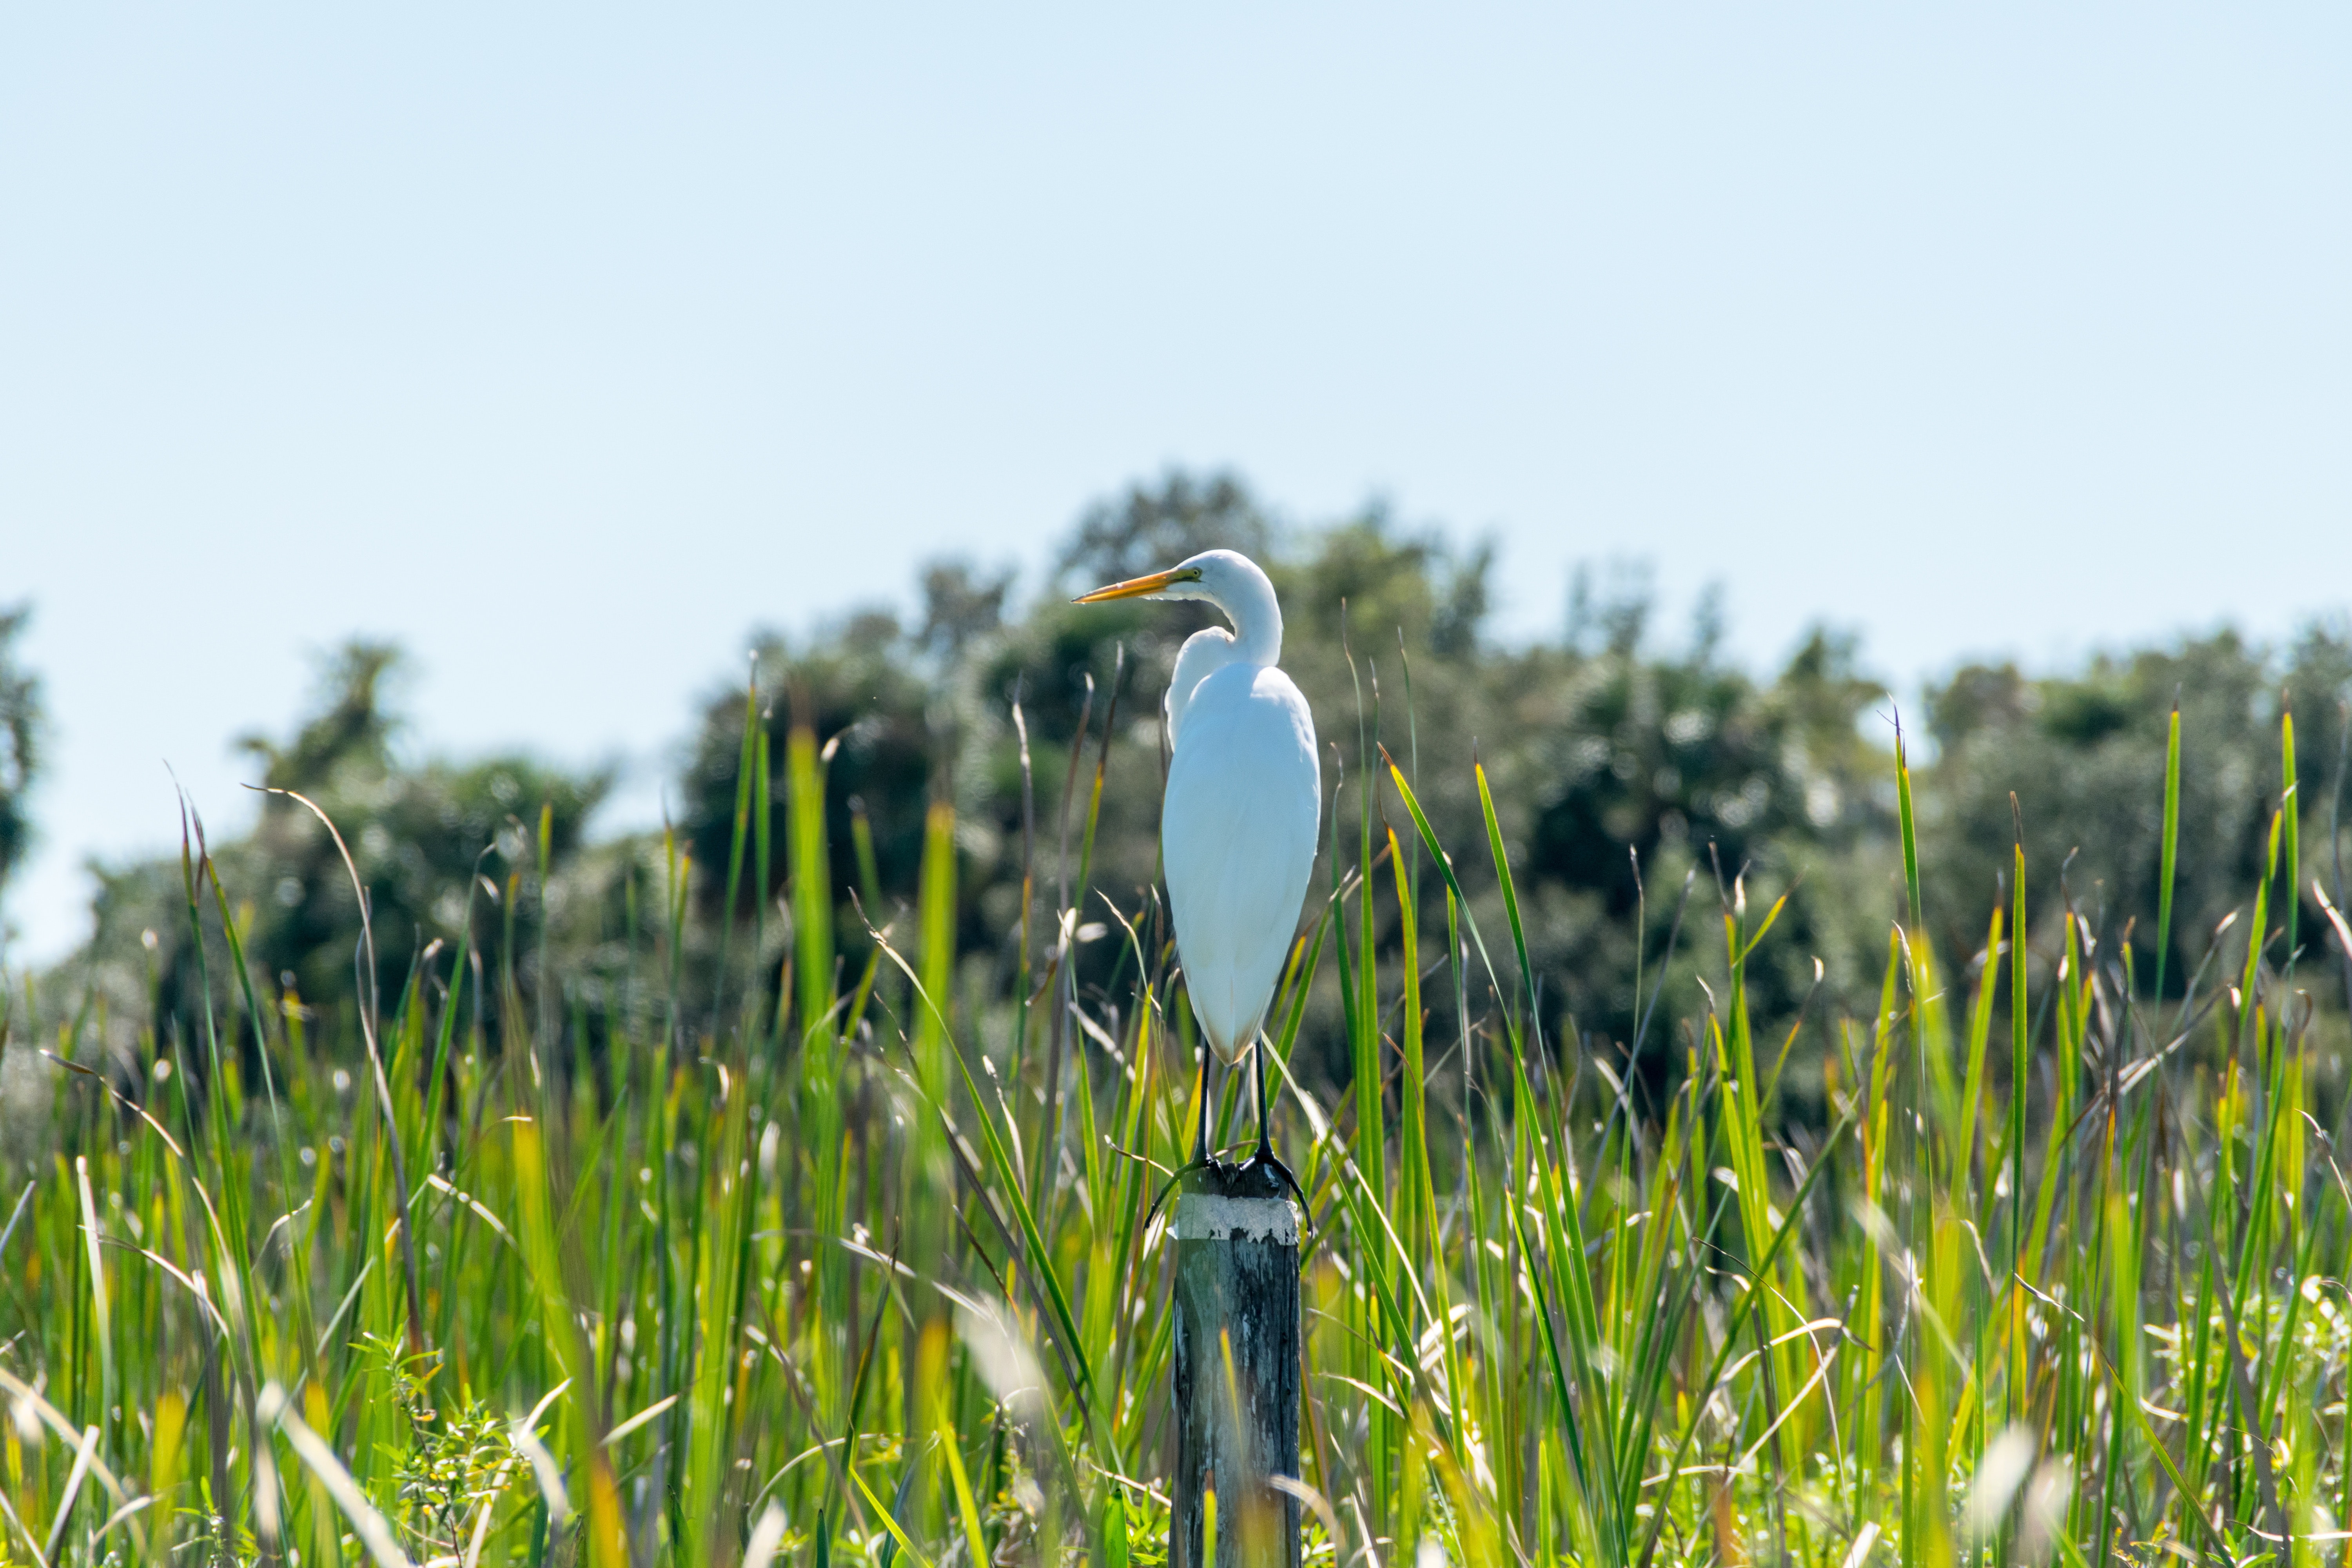 White and yellow bird on pole beside grasses during daytime photo